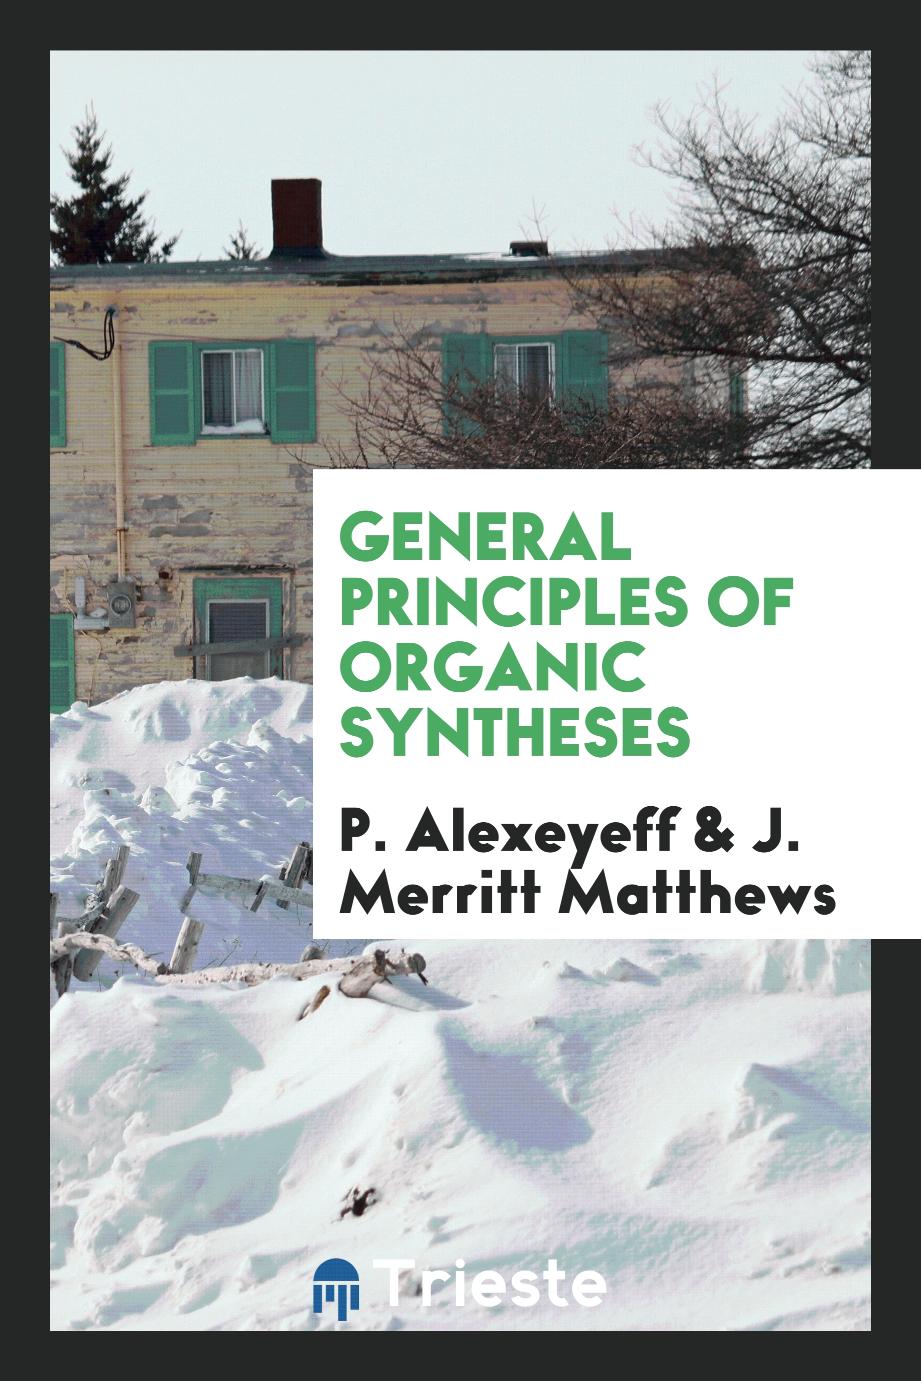 General principles of organic syntheses